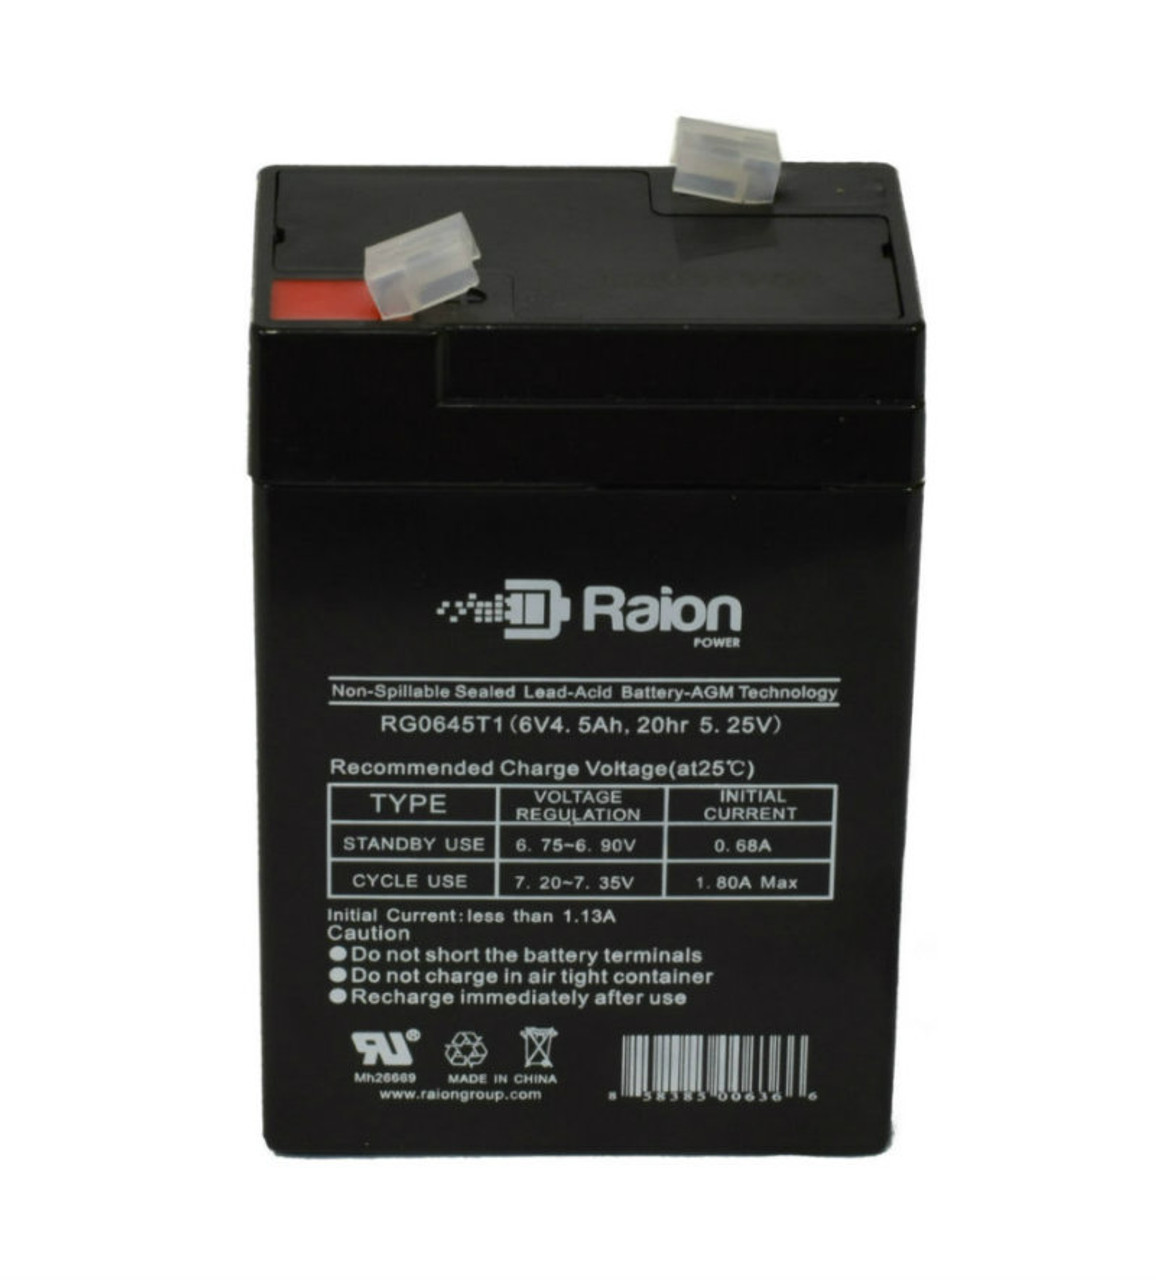 Raion Power RG0645T1 Replacement Battery Cartridge for Tianchang TC6-4.5